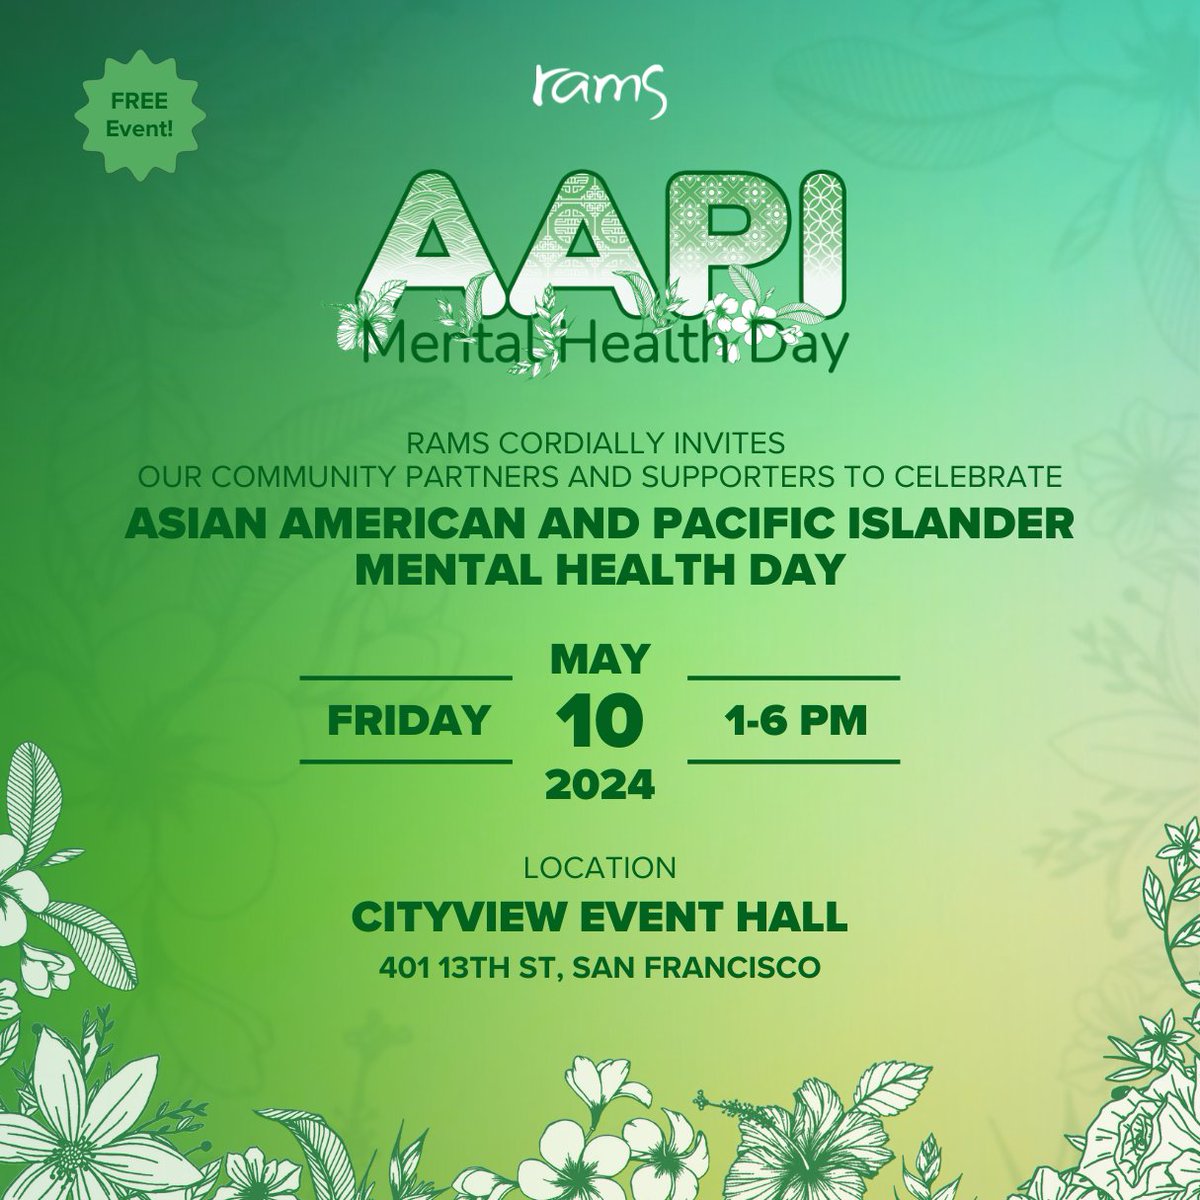 Two more weeks until RAMS 2024 AAPI Mental Health Day Celebration! 🎉Join us for engaging wellness activities - Drumming Circle, Siva4Wellness, Hula, CommuniTEA and come connect with our community partners. Food will be provided. Register today: tinyurl.com/RAMS-AAPI-2024